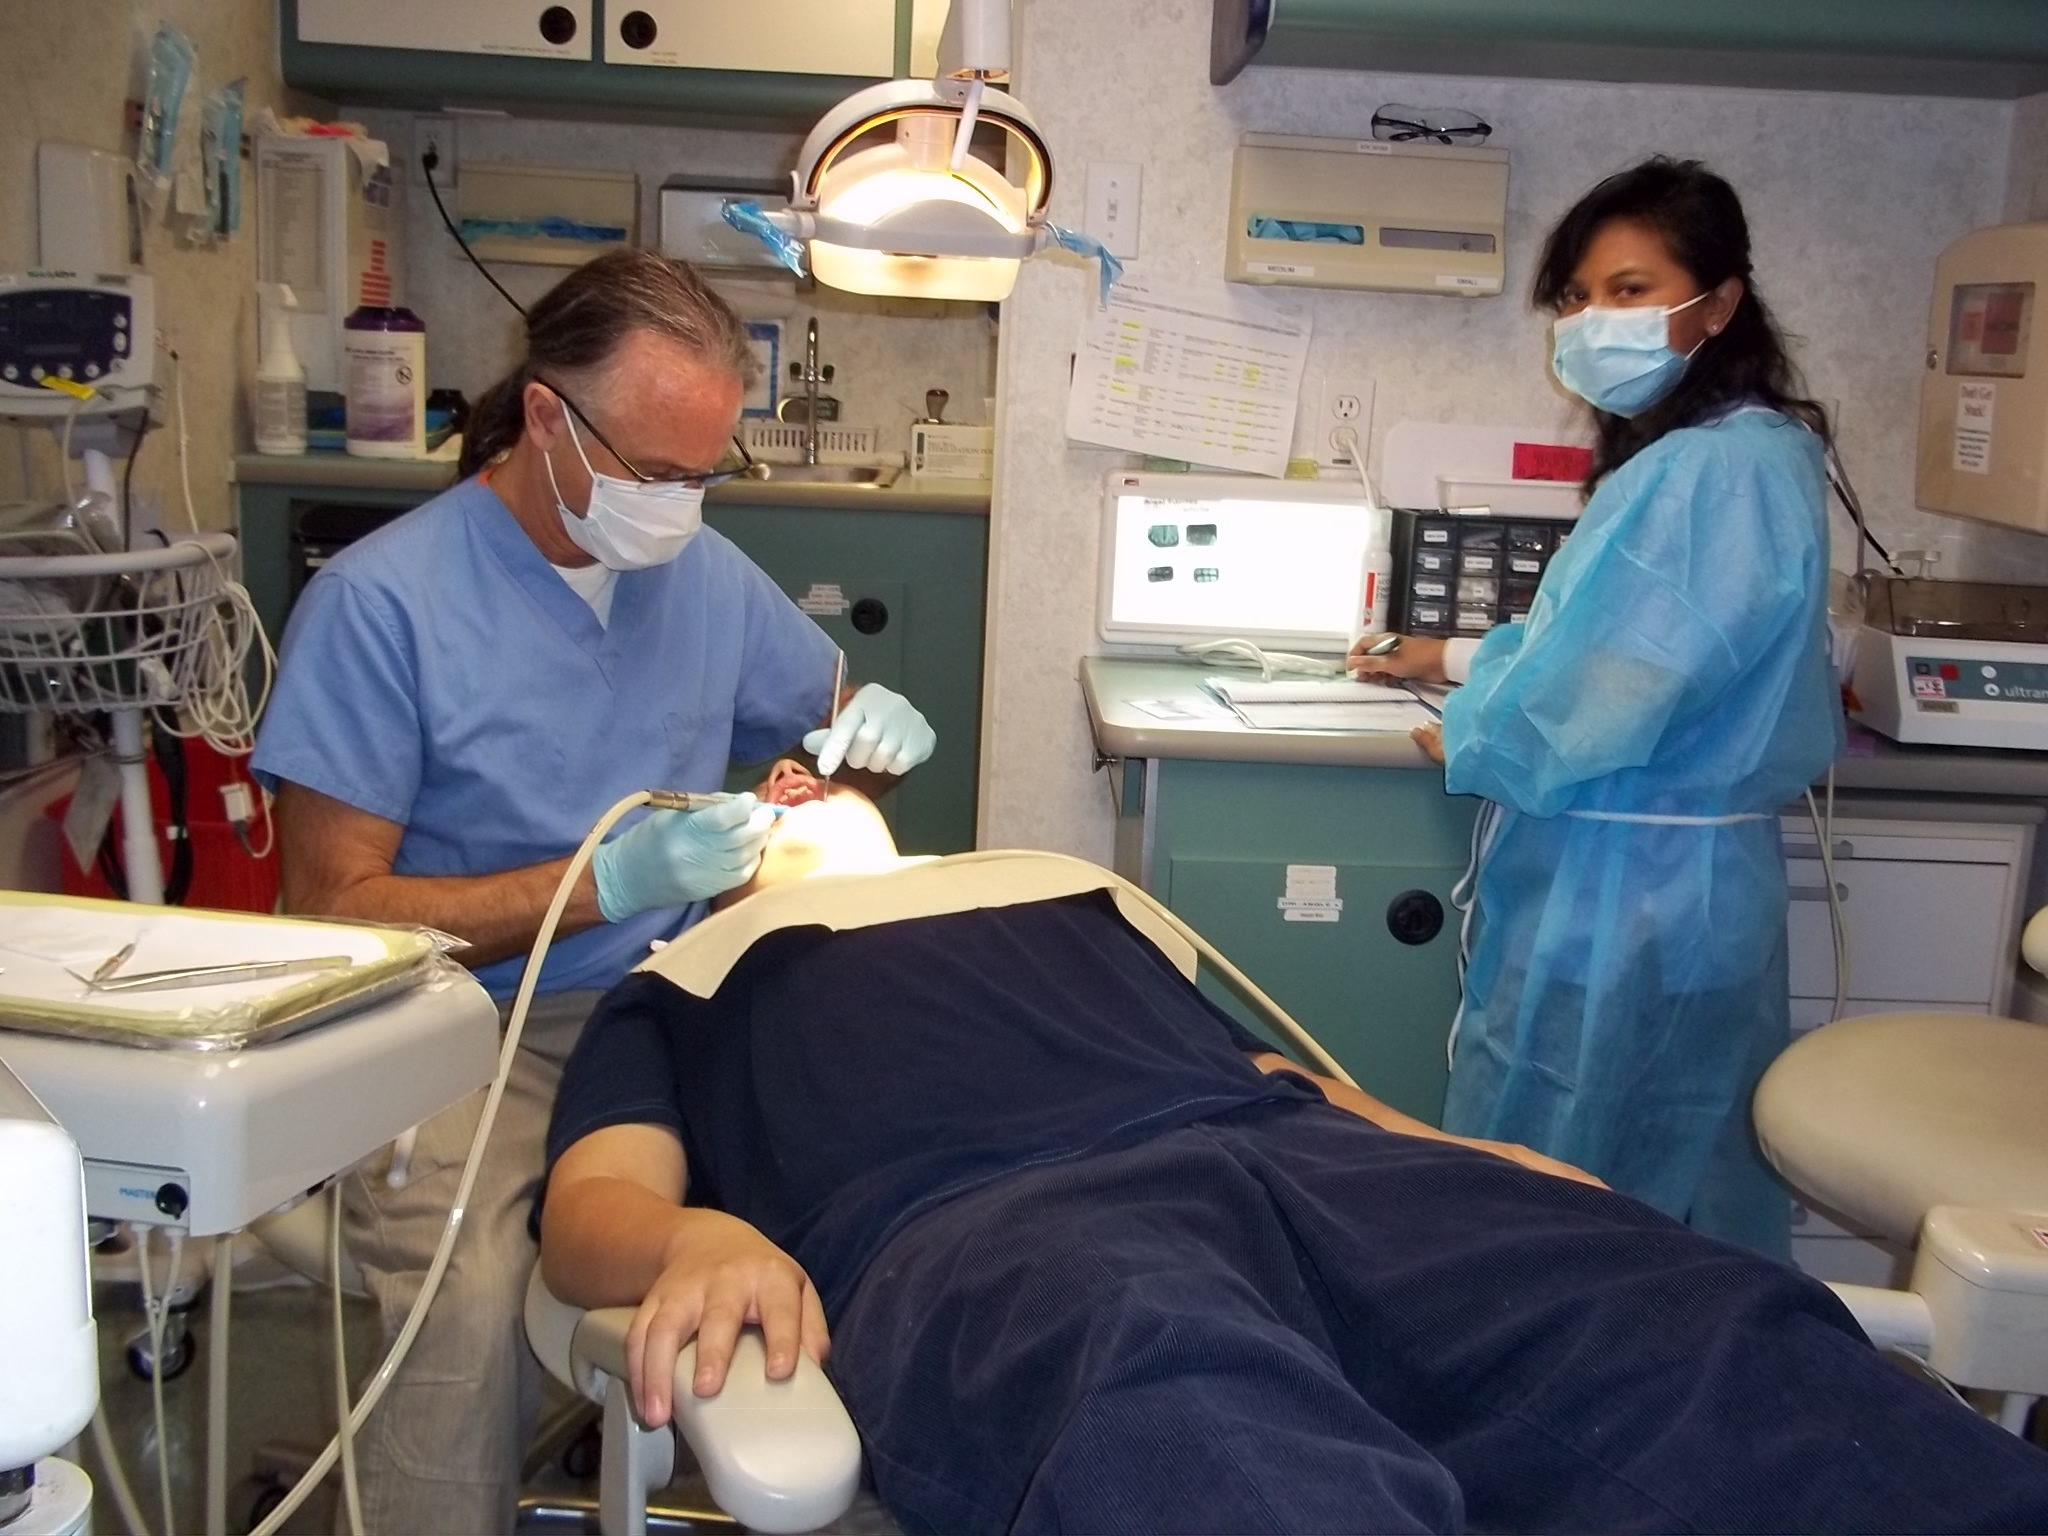 Lack of dental care assistance puts patients, hospitals in painful cycle \u2013 California Health Report